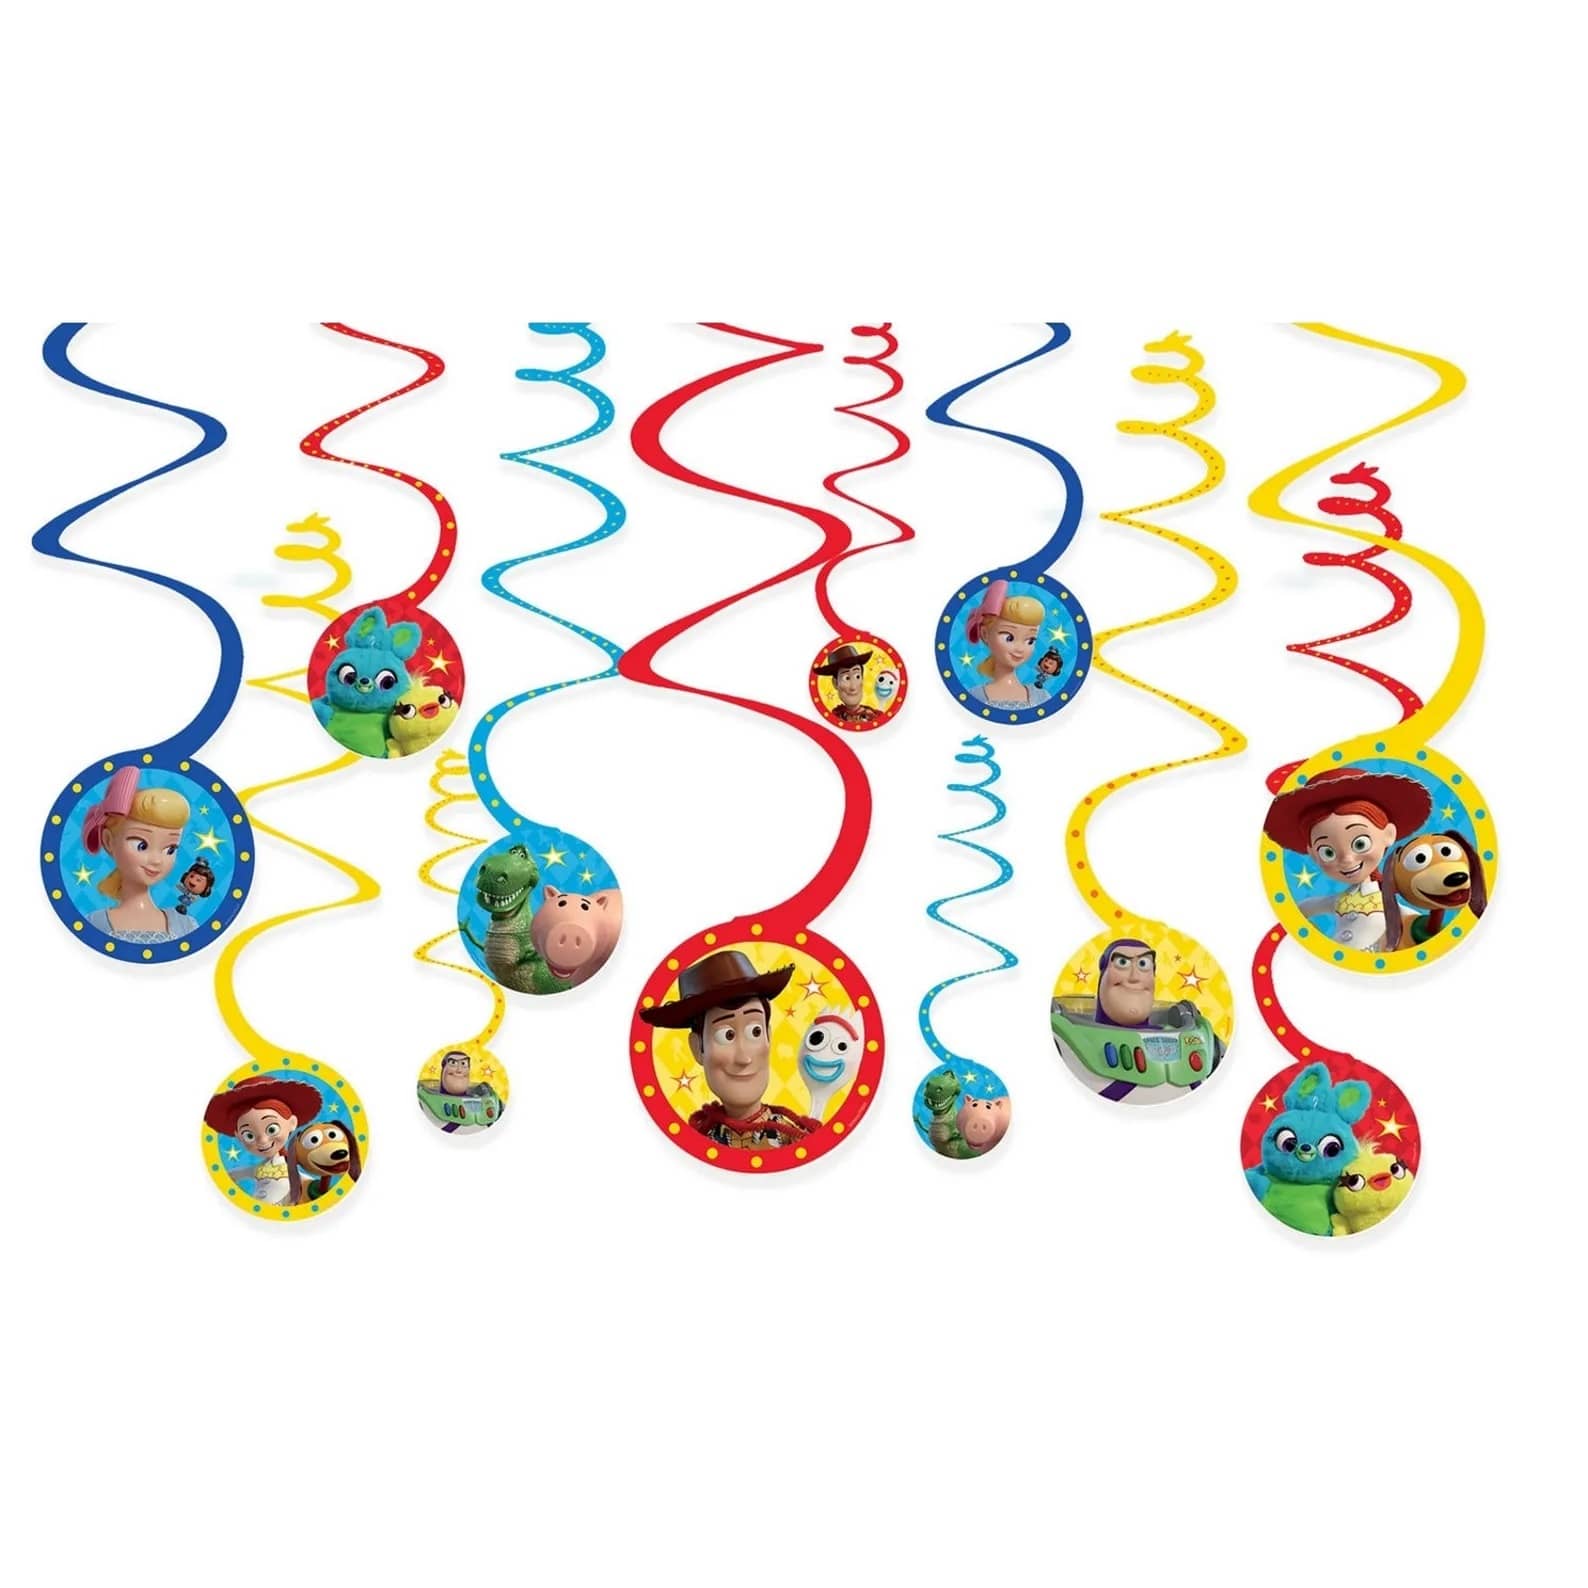 Toys Story 4 Spiral Hanging Swirl Decorations 12pk - Party Owls